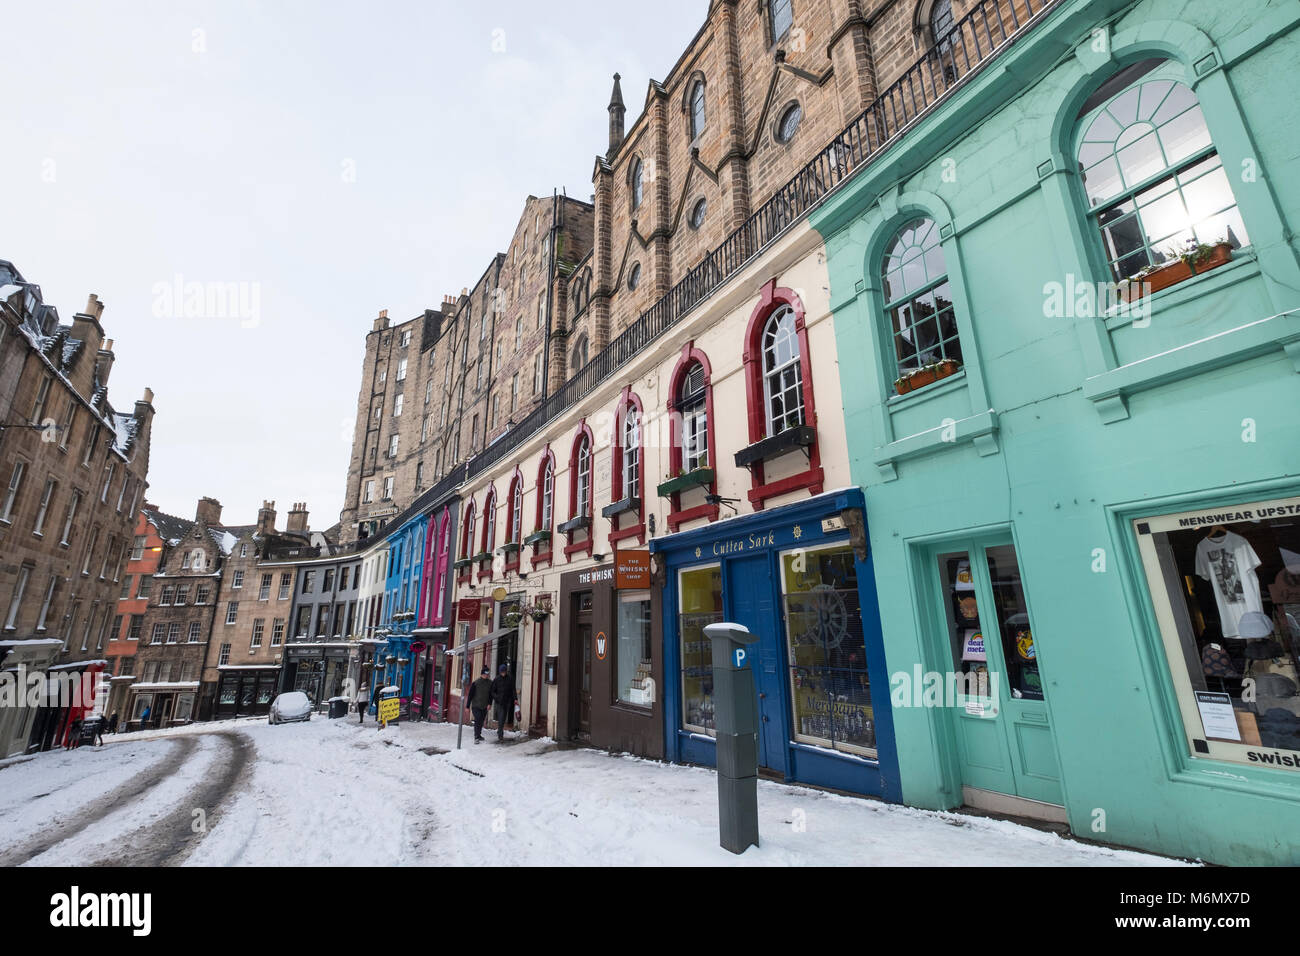 View of colourful shop fronts on historic Victoria Street in Edinburgh Old Town after heavy snow, Scotland, United Kingdom Stock Photo